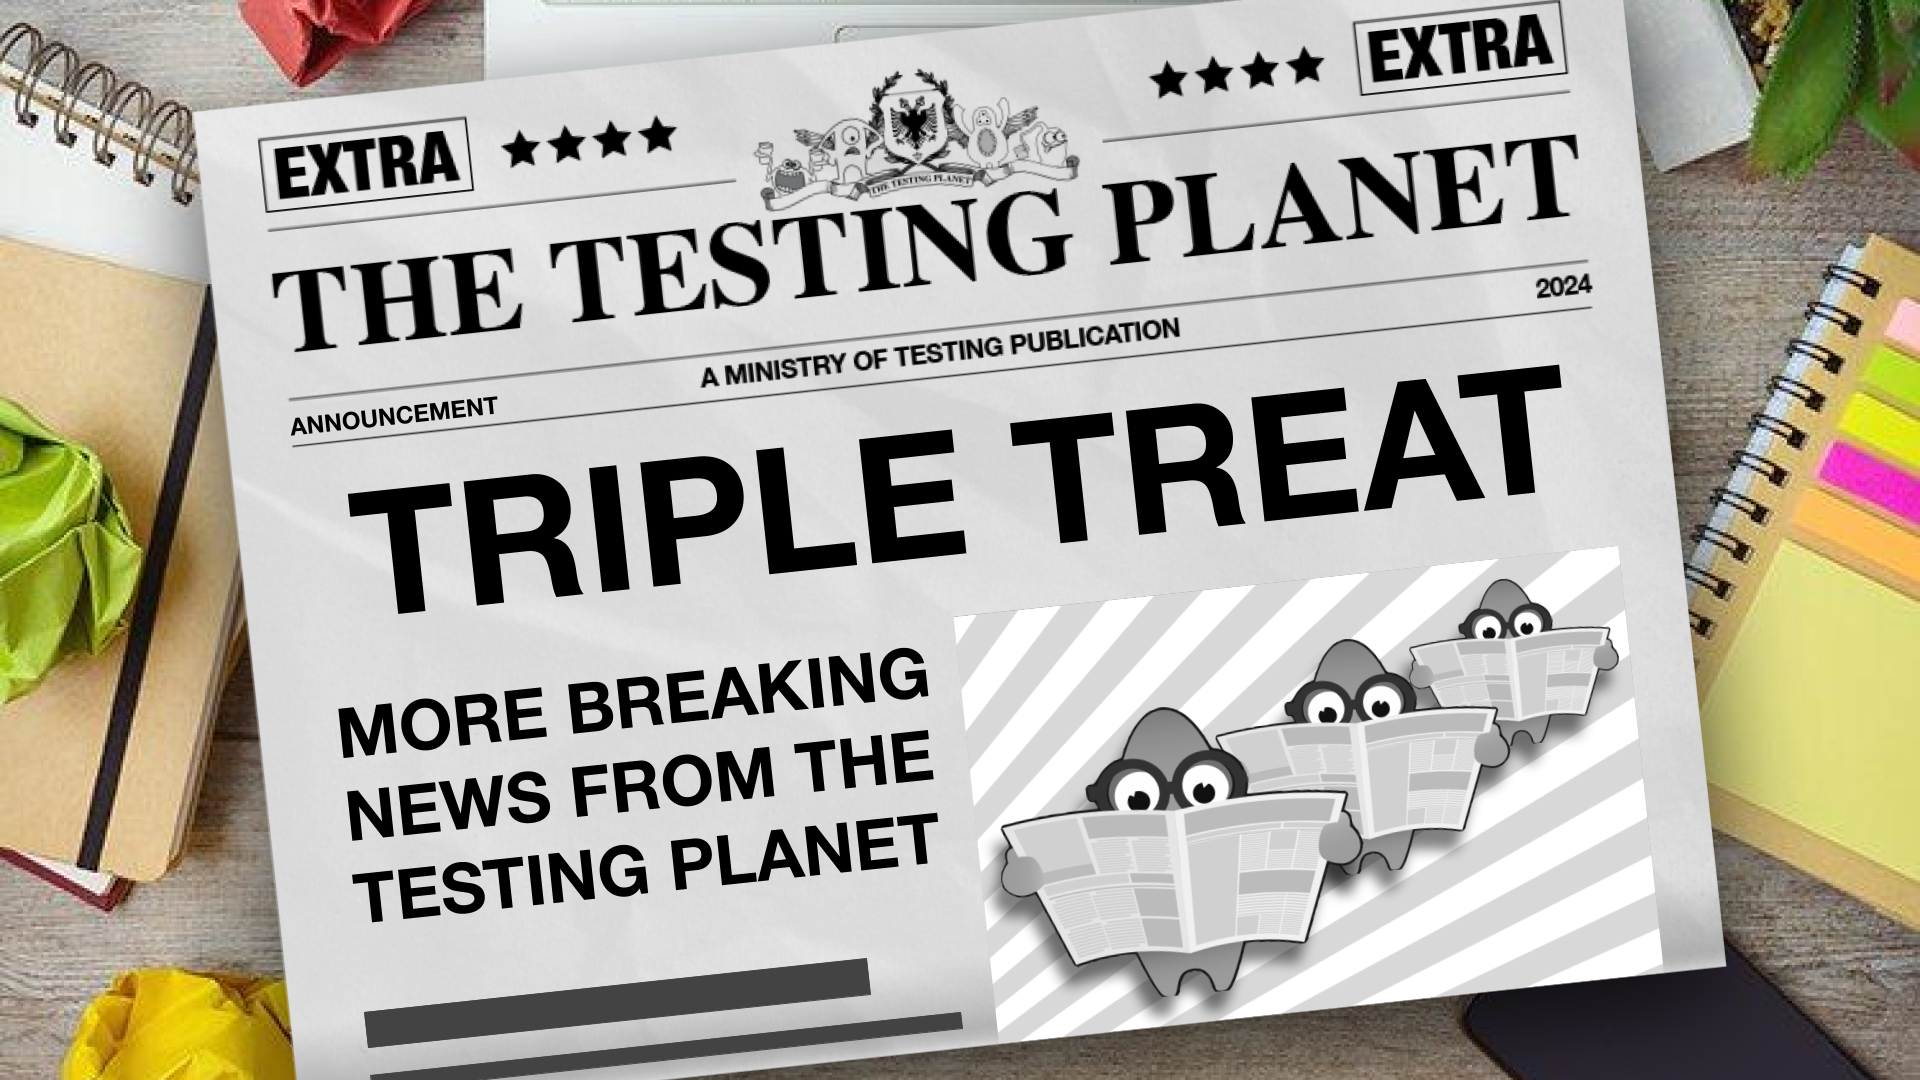 A Triple Treat from The Testing Planet